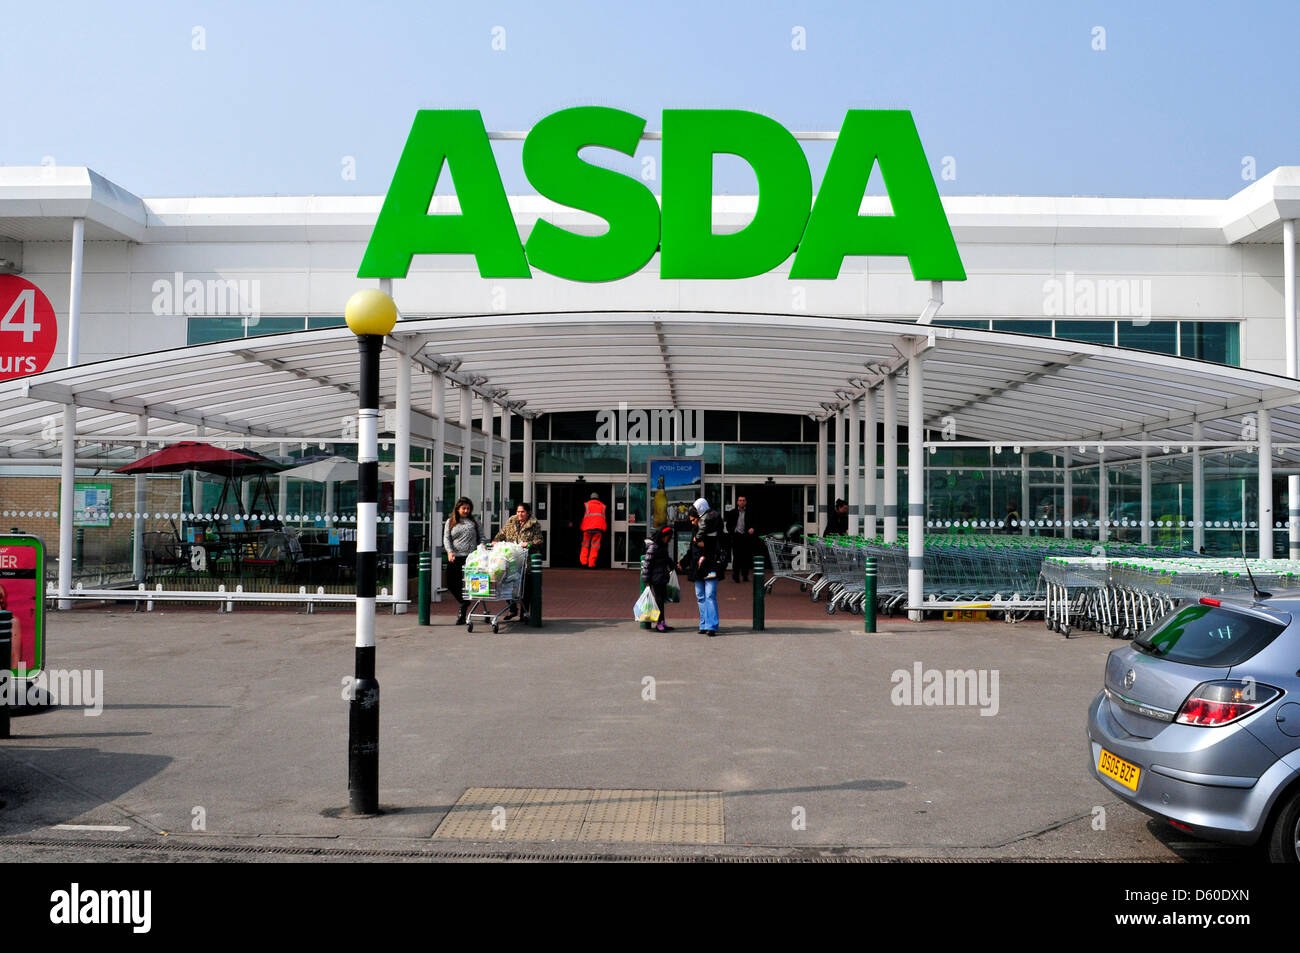 A front view of Asda supermarket in Park Royal, London, UK Stock Photo